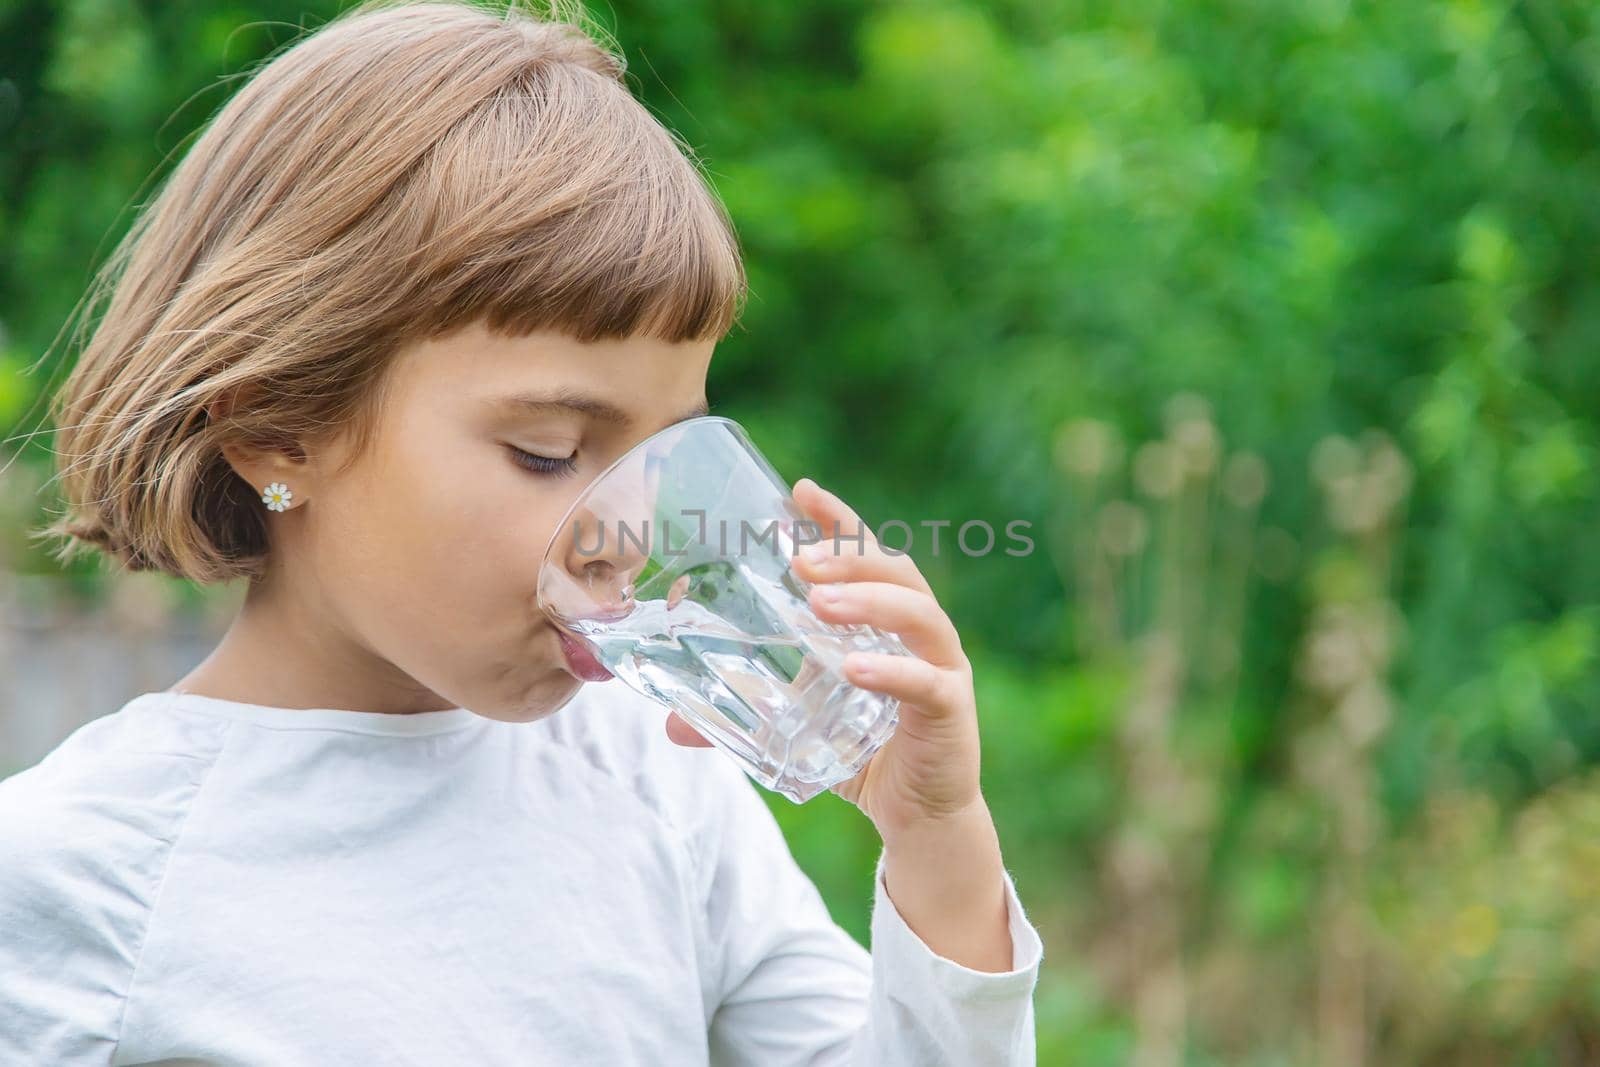 child drinks water from a glass. Selective focus.